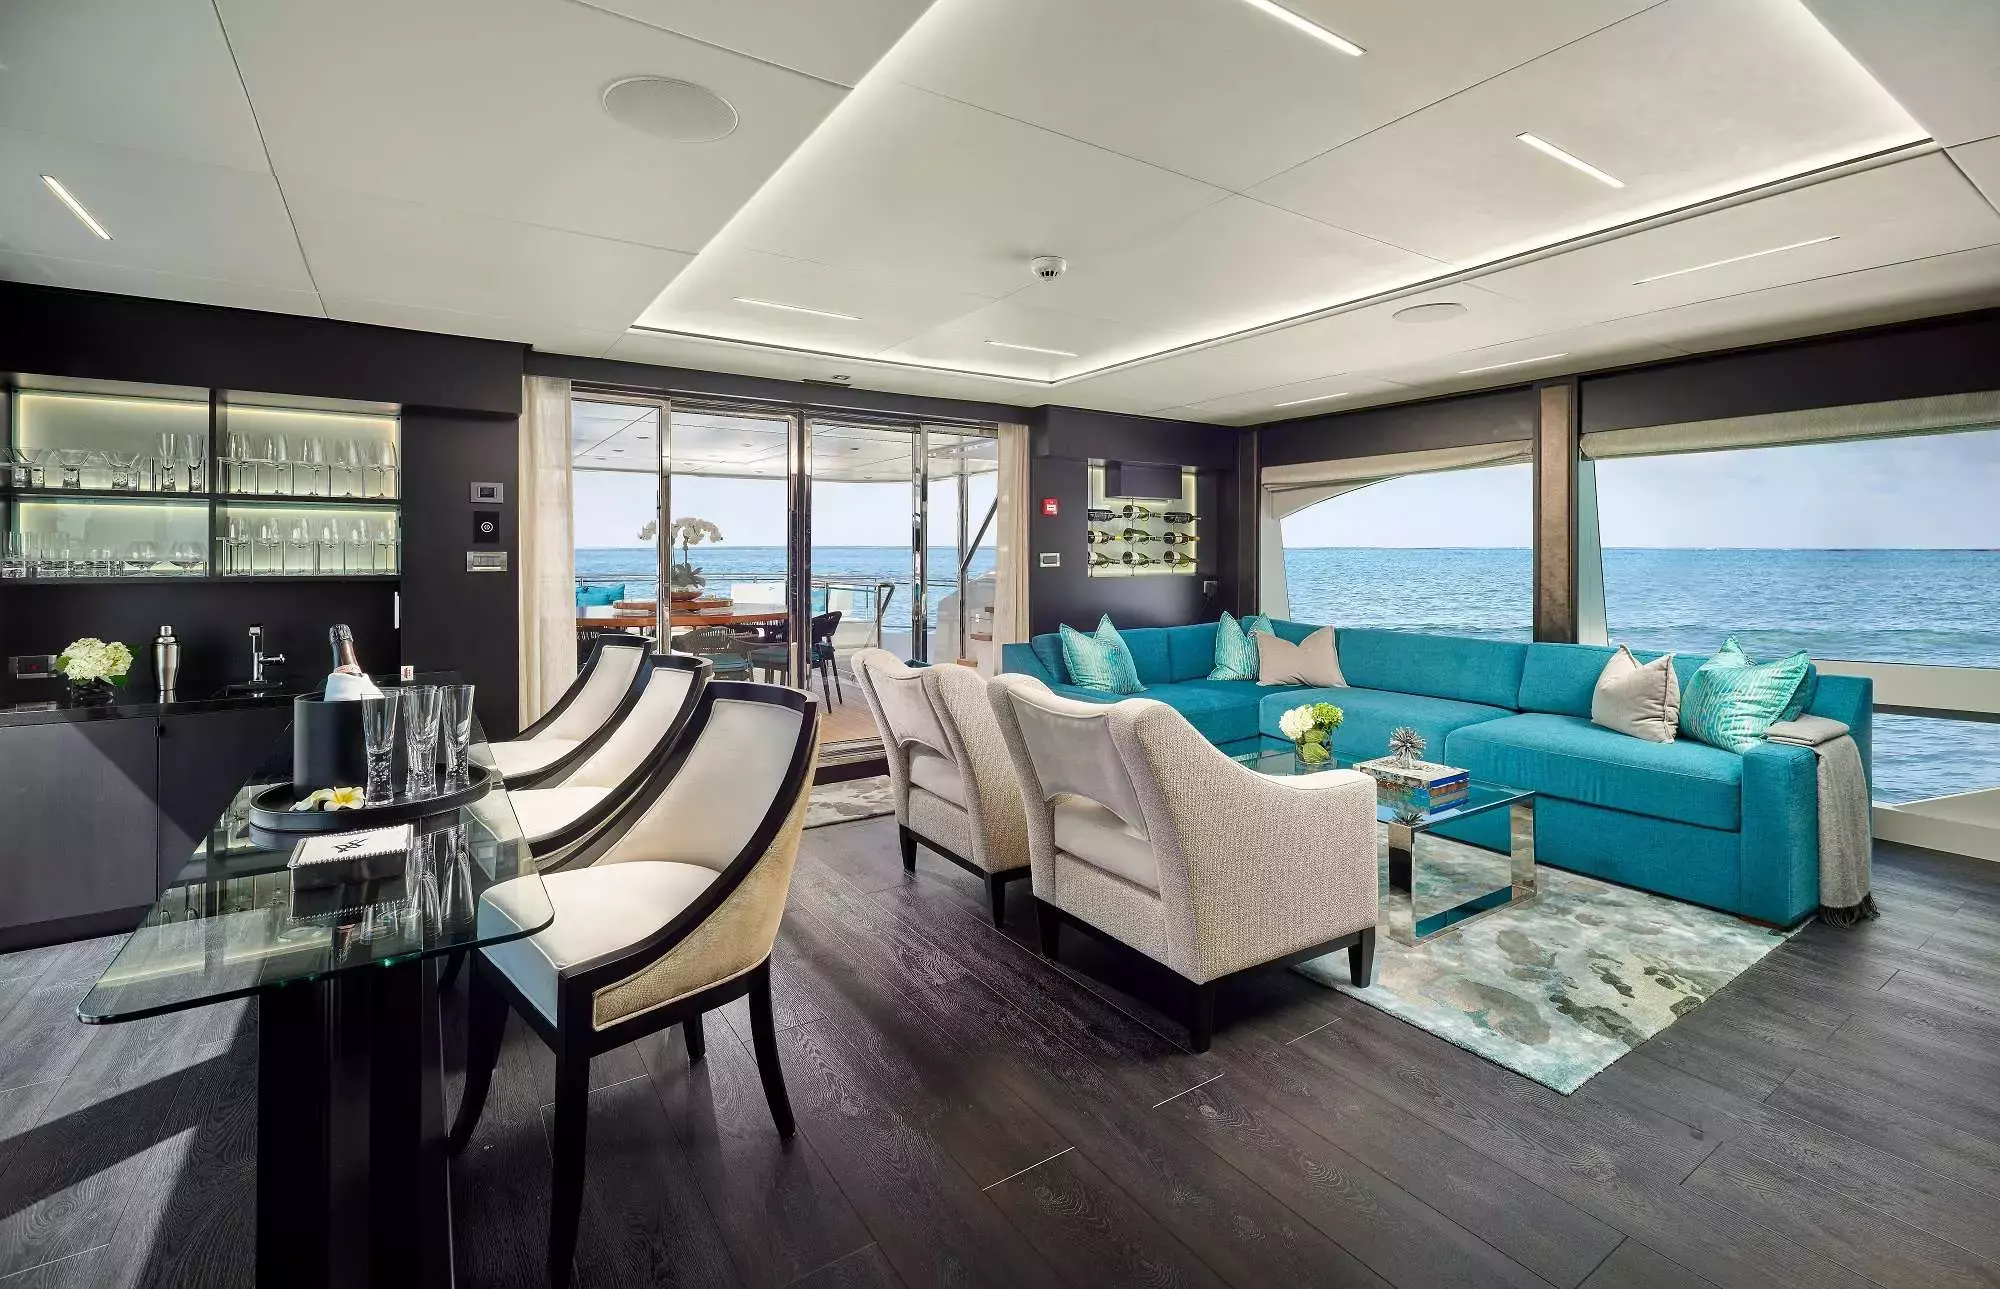 Romeo Foxtrot by Hargrave - Top rates for a Charter of a private Superyacht in Anguilla